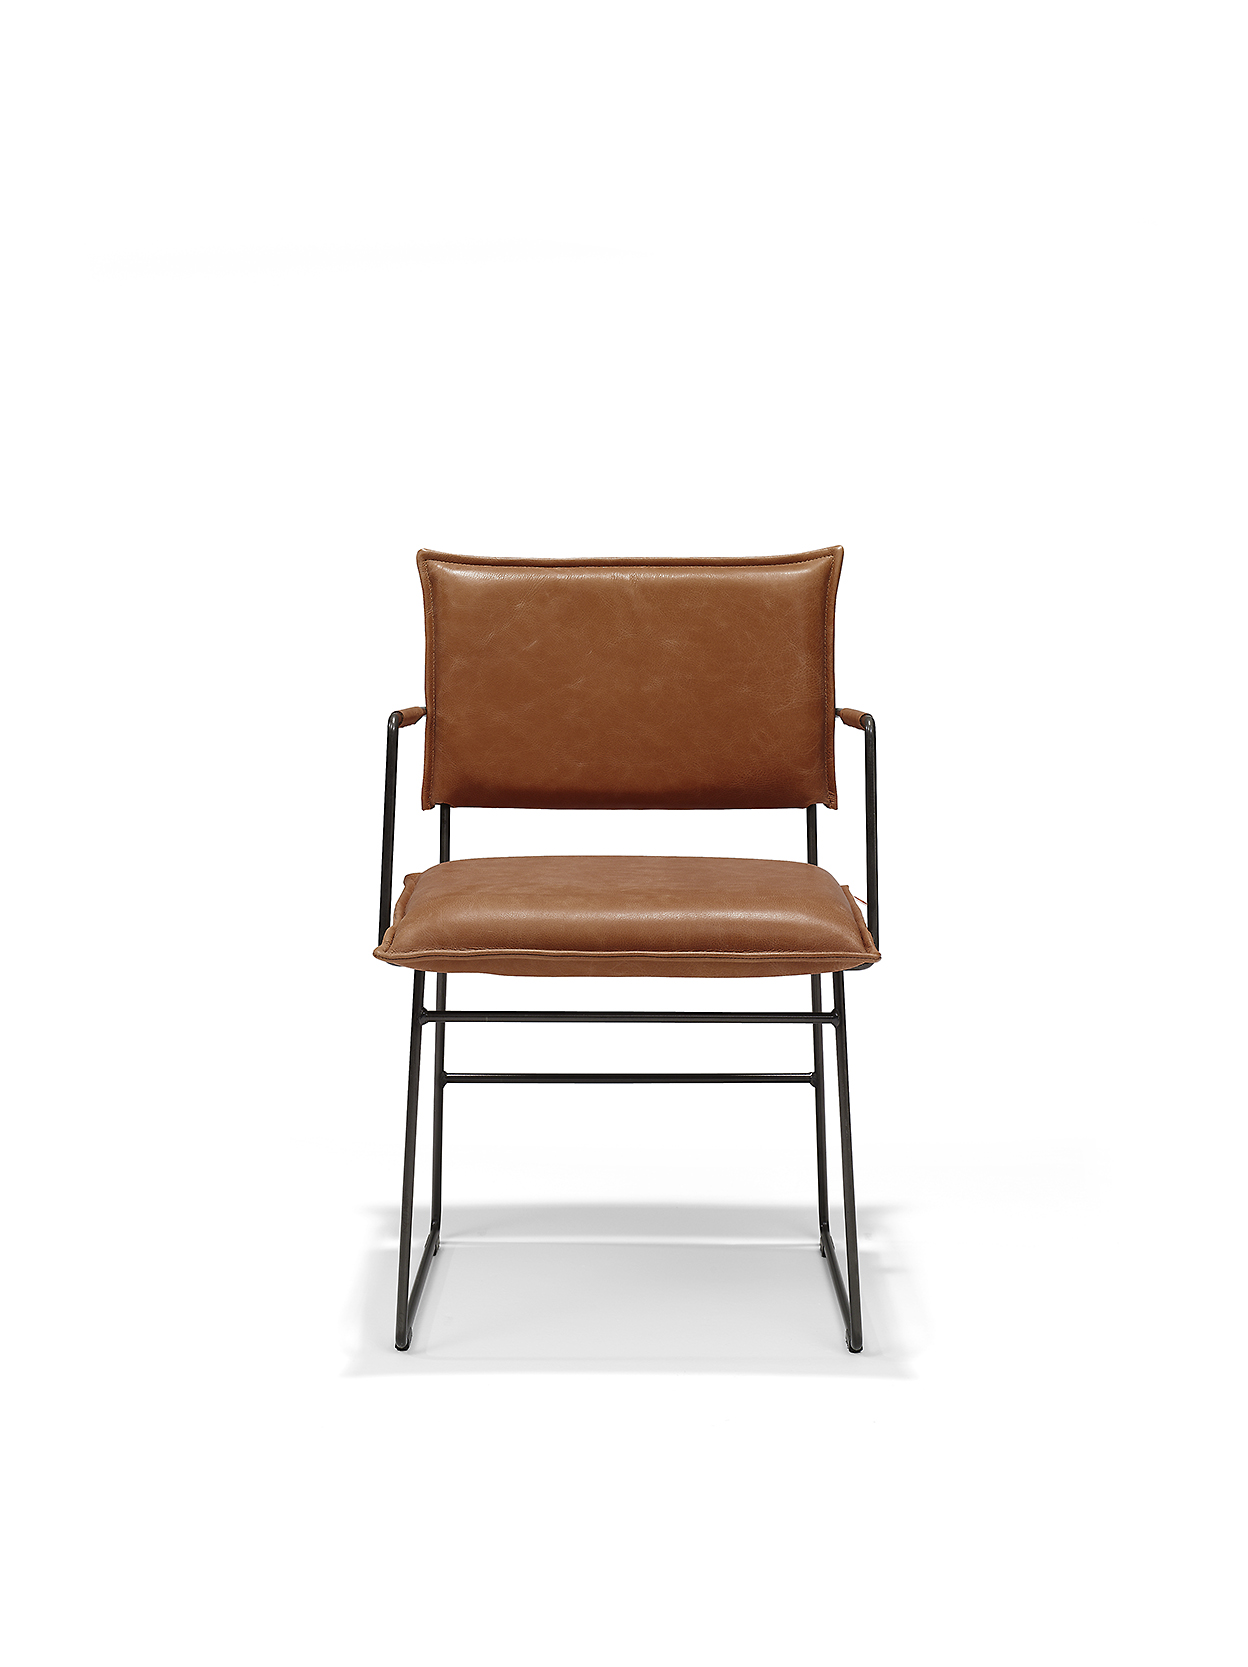 Norman Chair With Arm Bonanza Tan Front LR